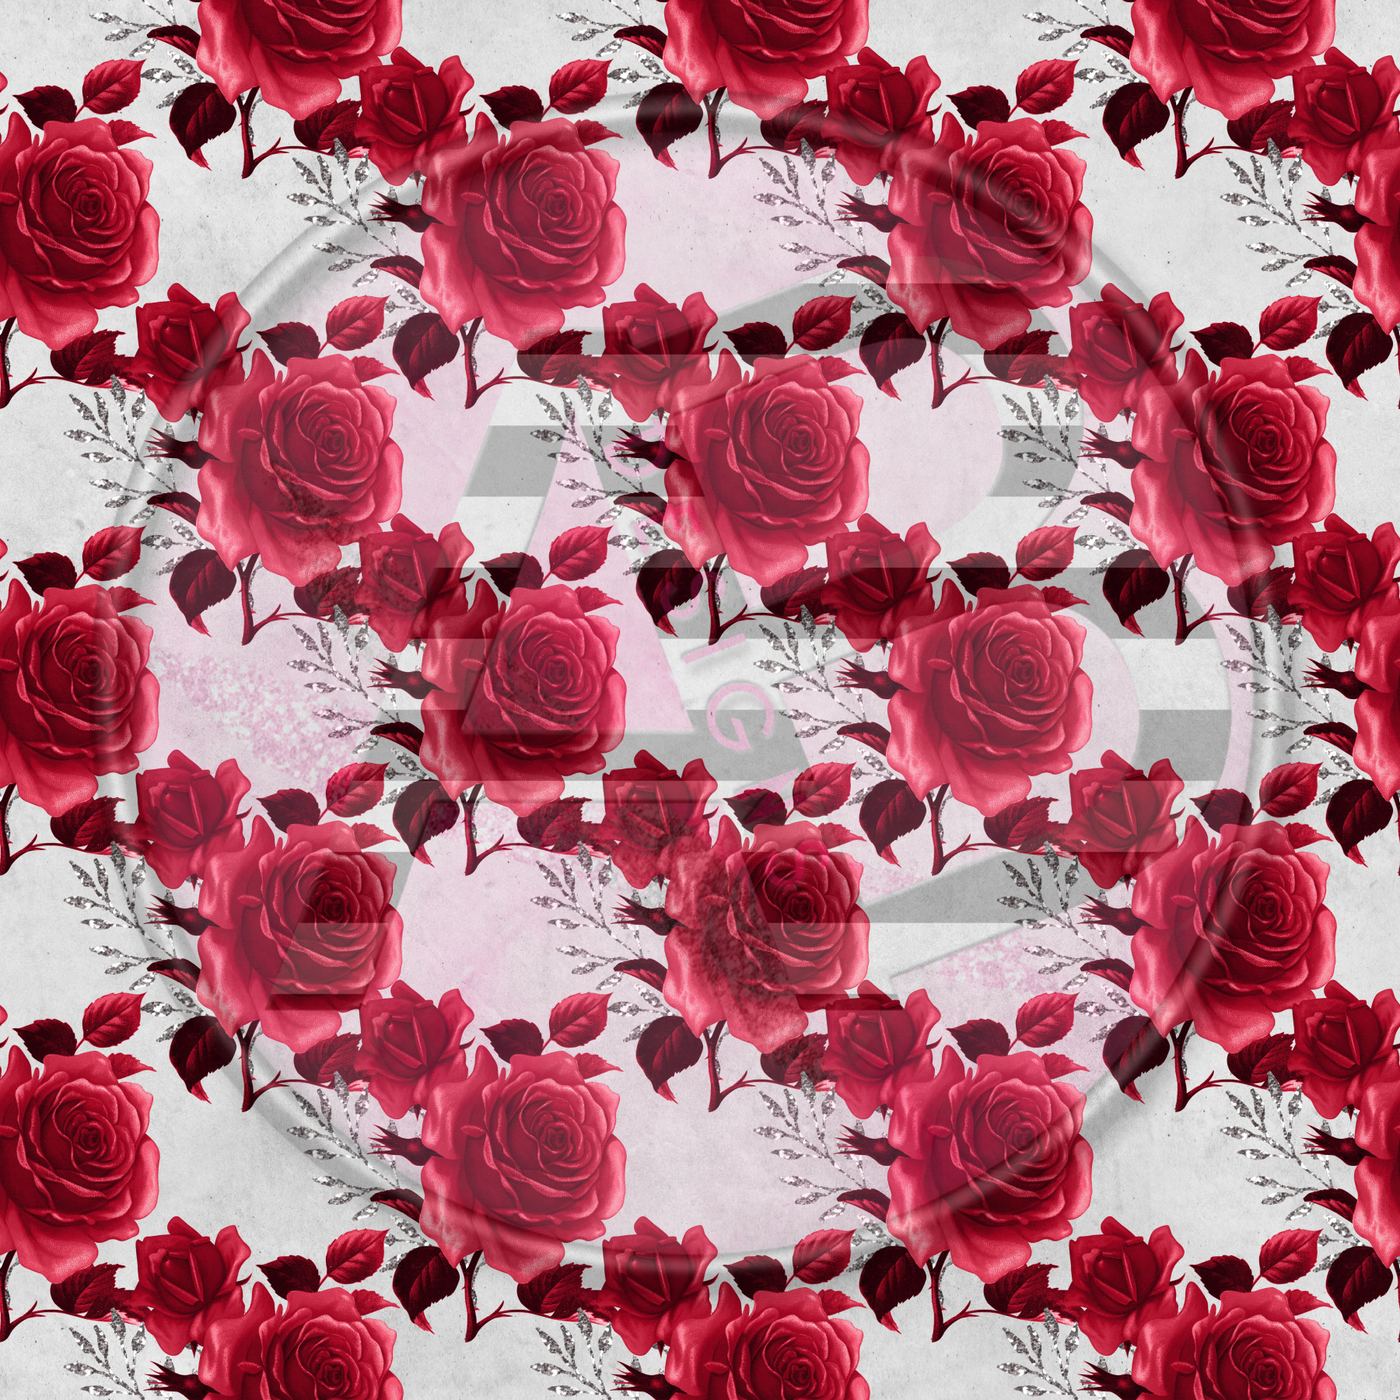 Adhesive Patterned Vinyl - Red & Silver Roses 12